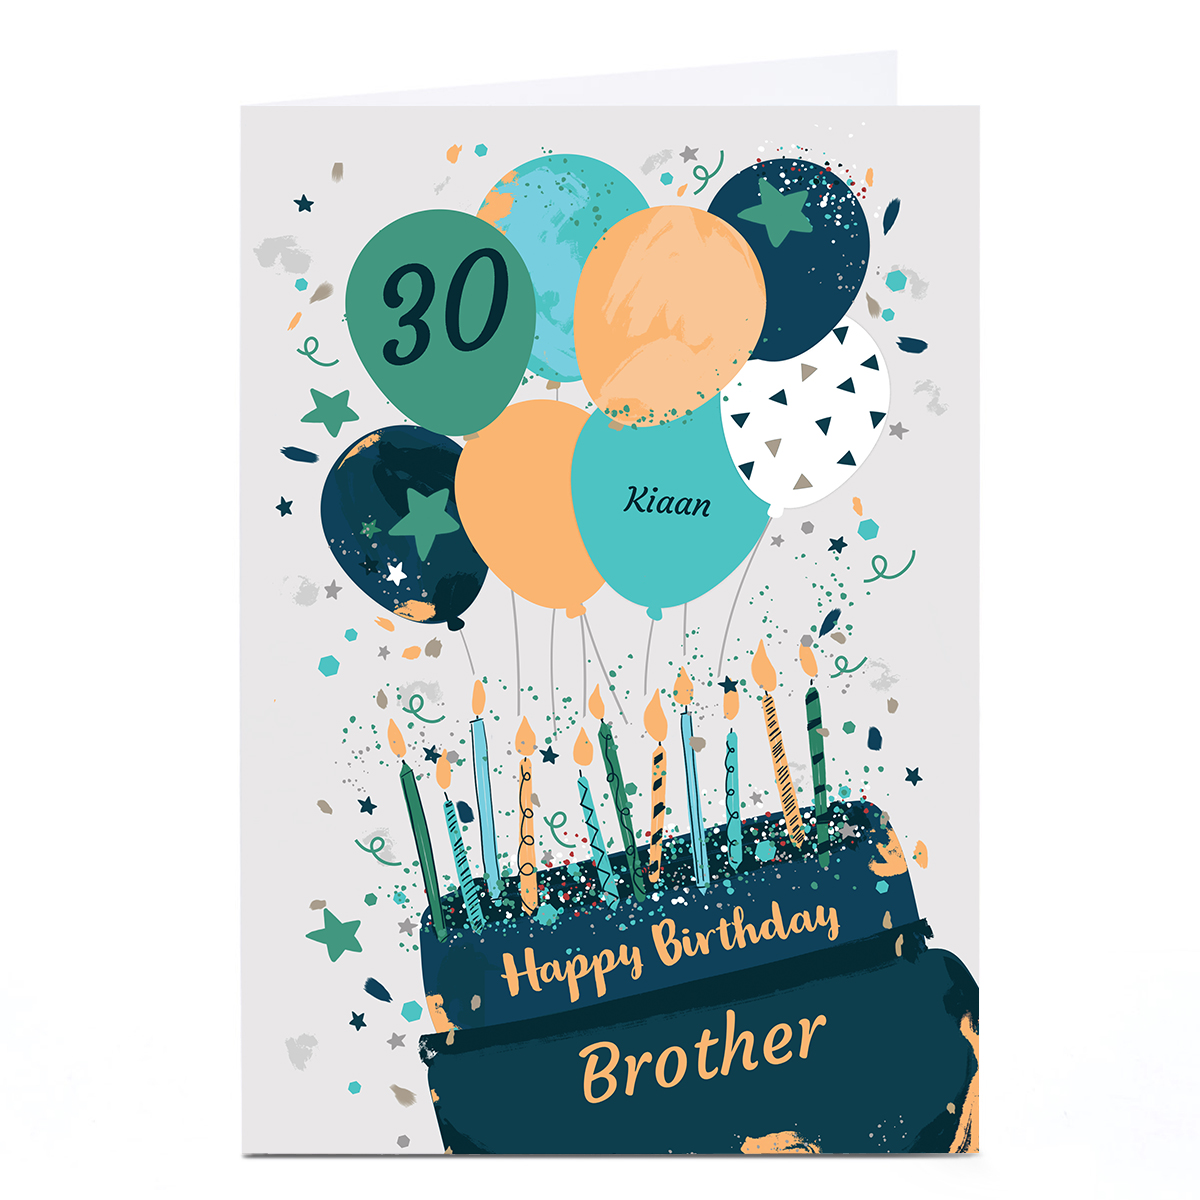 Personalised Brother Birthday Card - Cake & Balloons, Editable Age